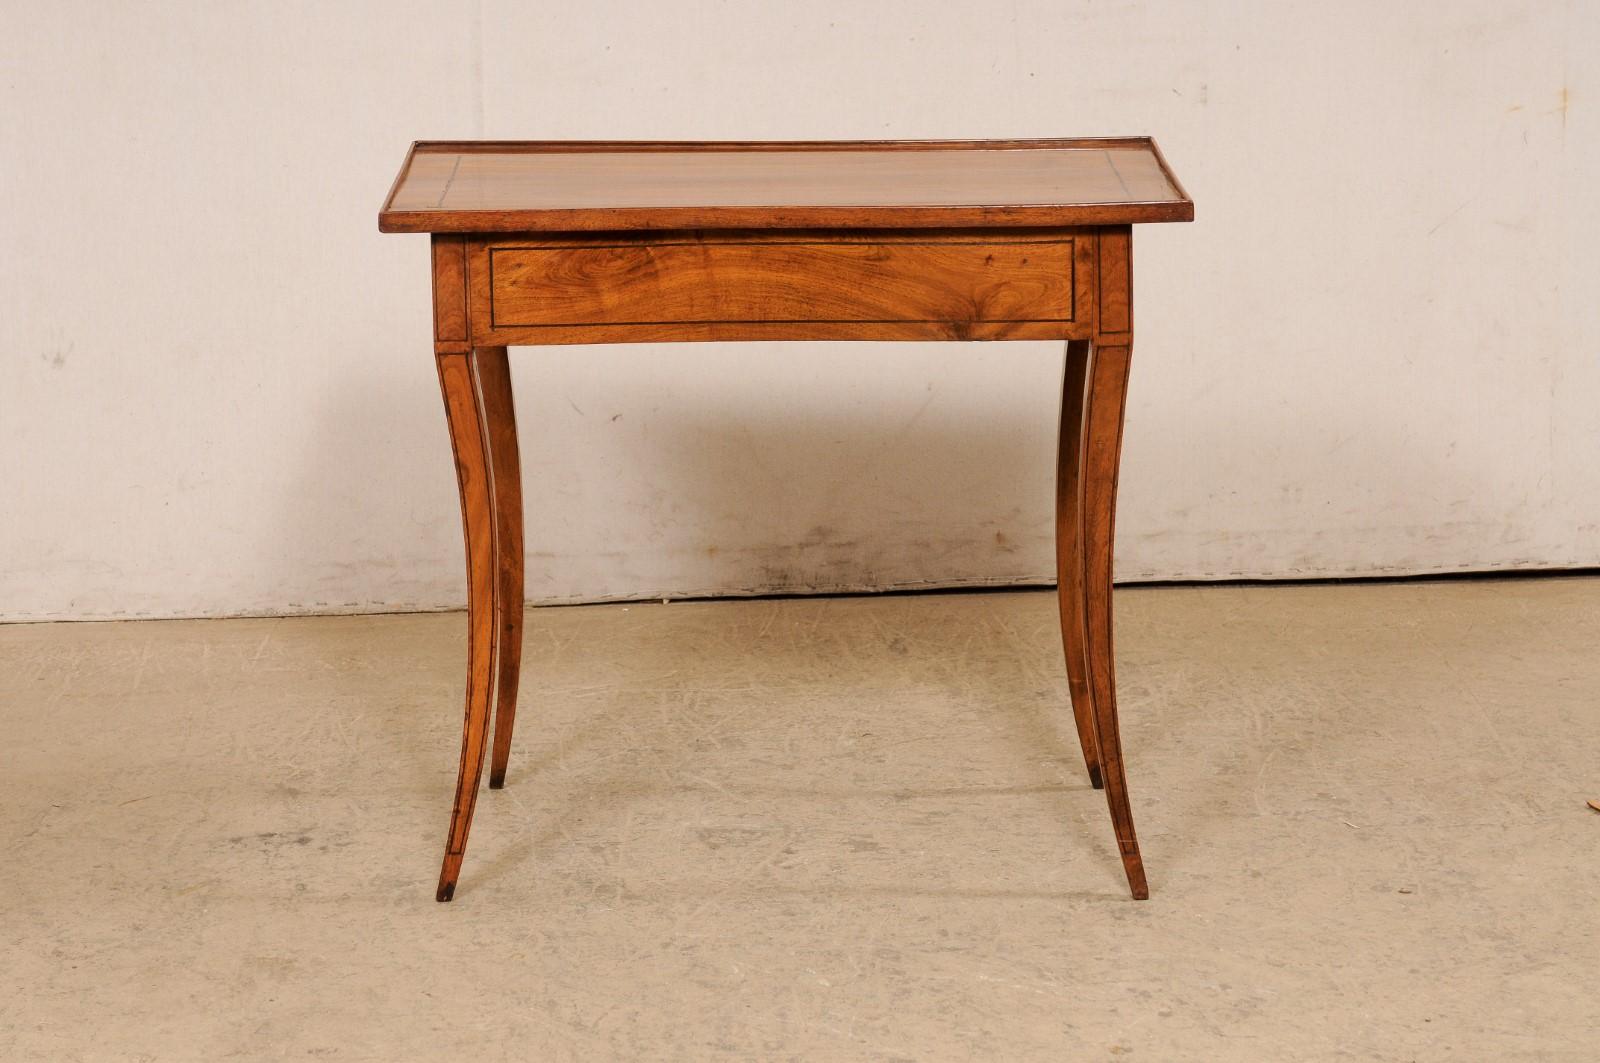 An Early 19th C. Italian Occasional Table w/Inlay Accents & Elegant Sabre Legs For Sale 3